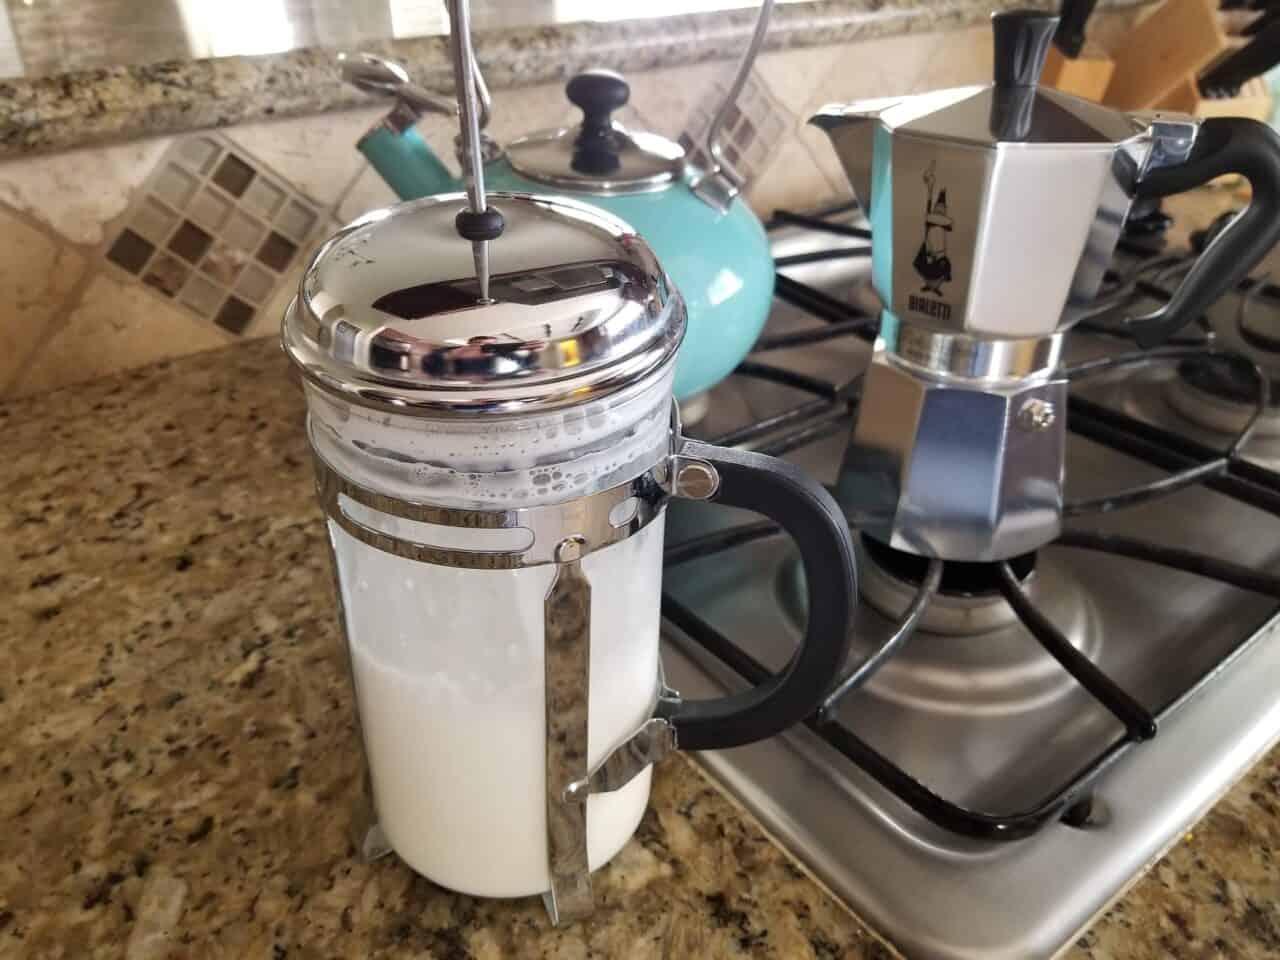 Frothing milk with a French press